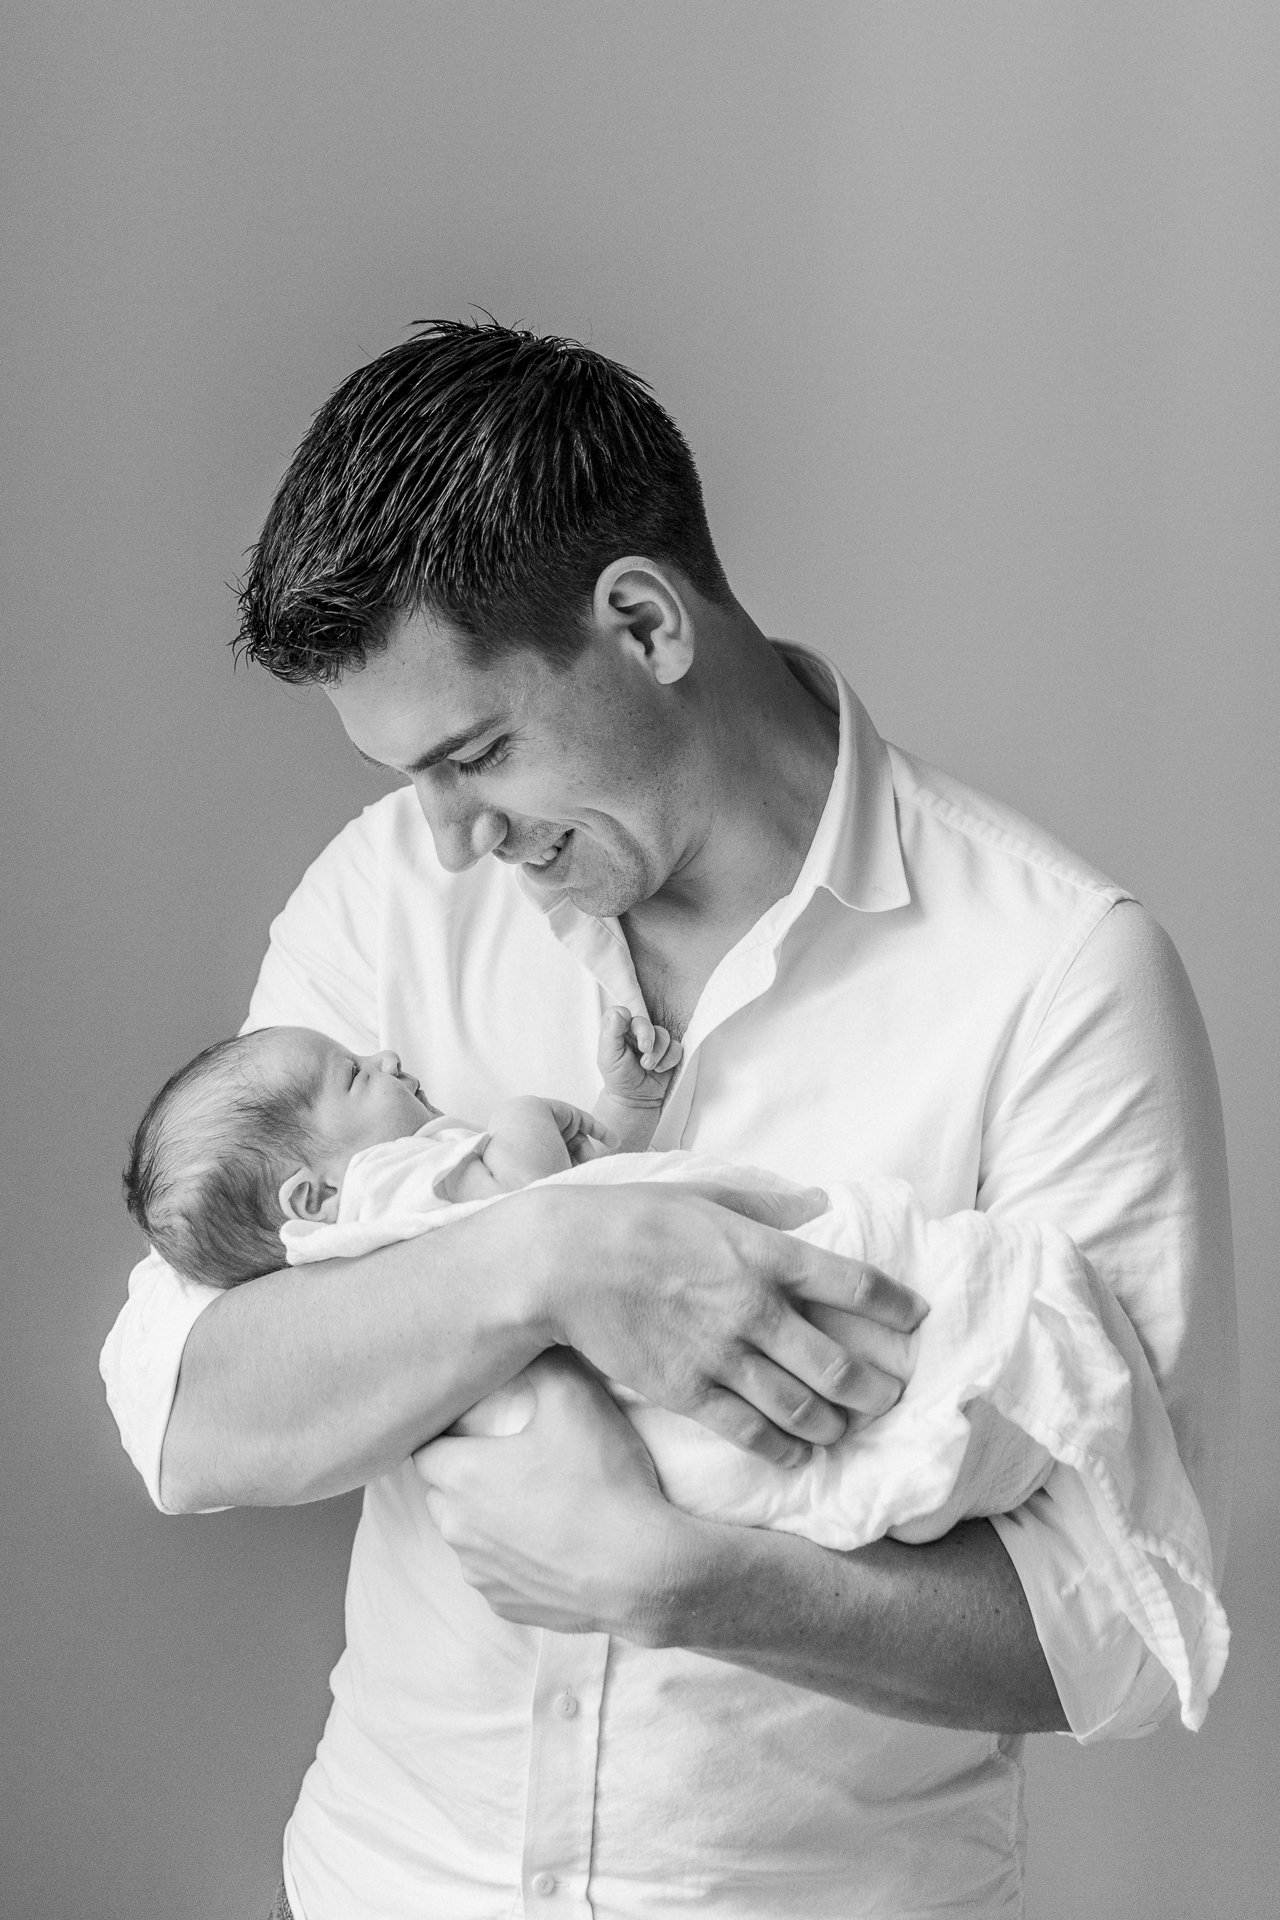  A father holds his swaddled baby boy smiling down at him by Nicole Hawkins Photography a newborn photographer. father with baby in-home portrait #nicolehawkinsphotography #NYCbabyphotography #newbornportrait #NewYorkStudioPhotography #newbornsession